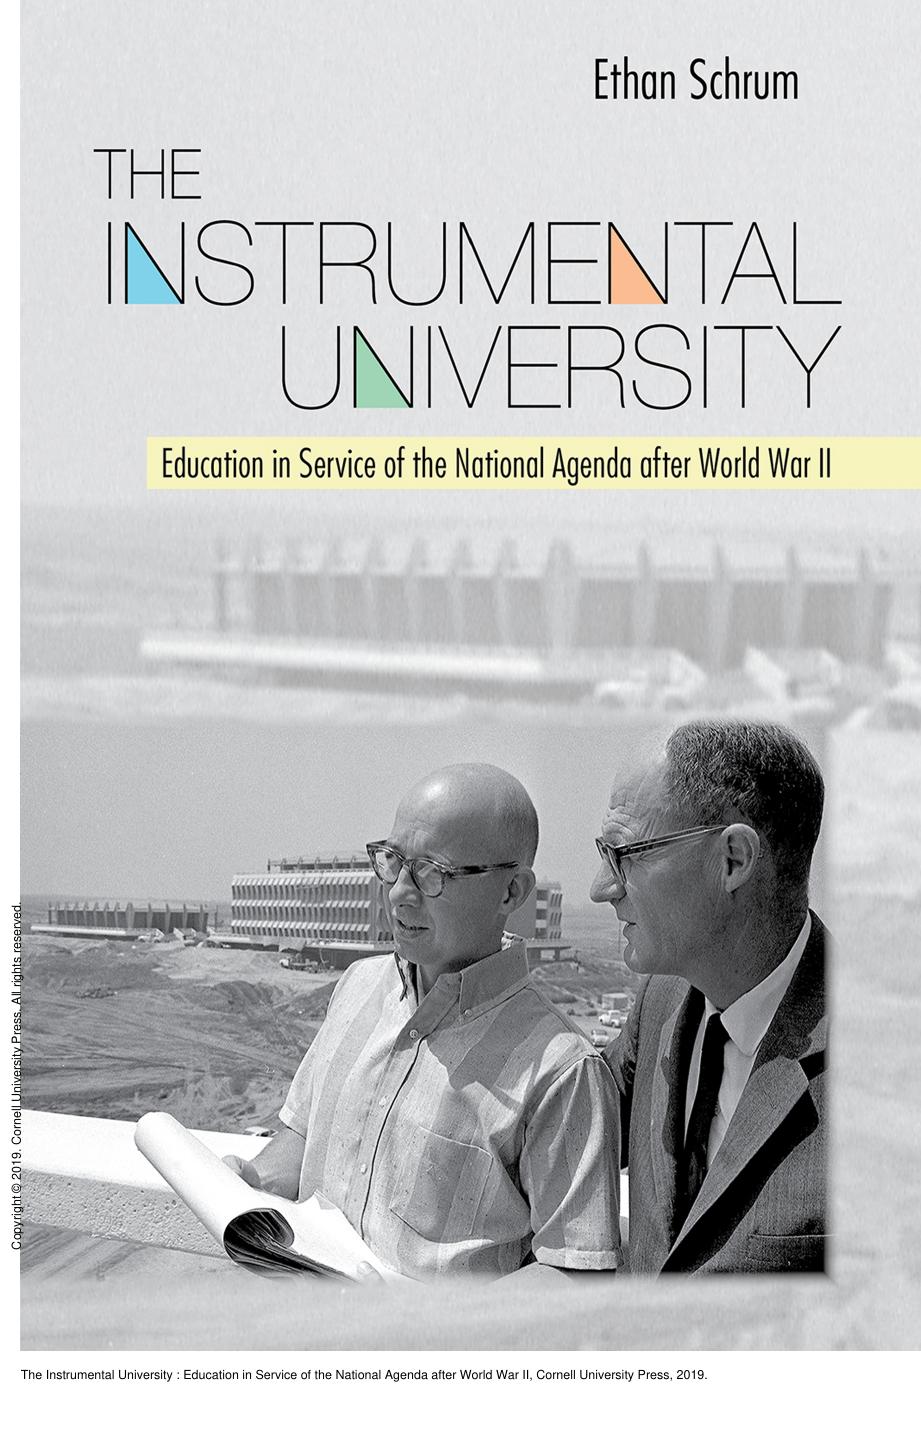 The Instrumental University : Education in Service of the National Agenda after World War II by Ethan Schrum